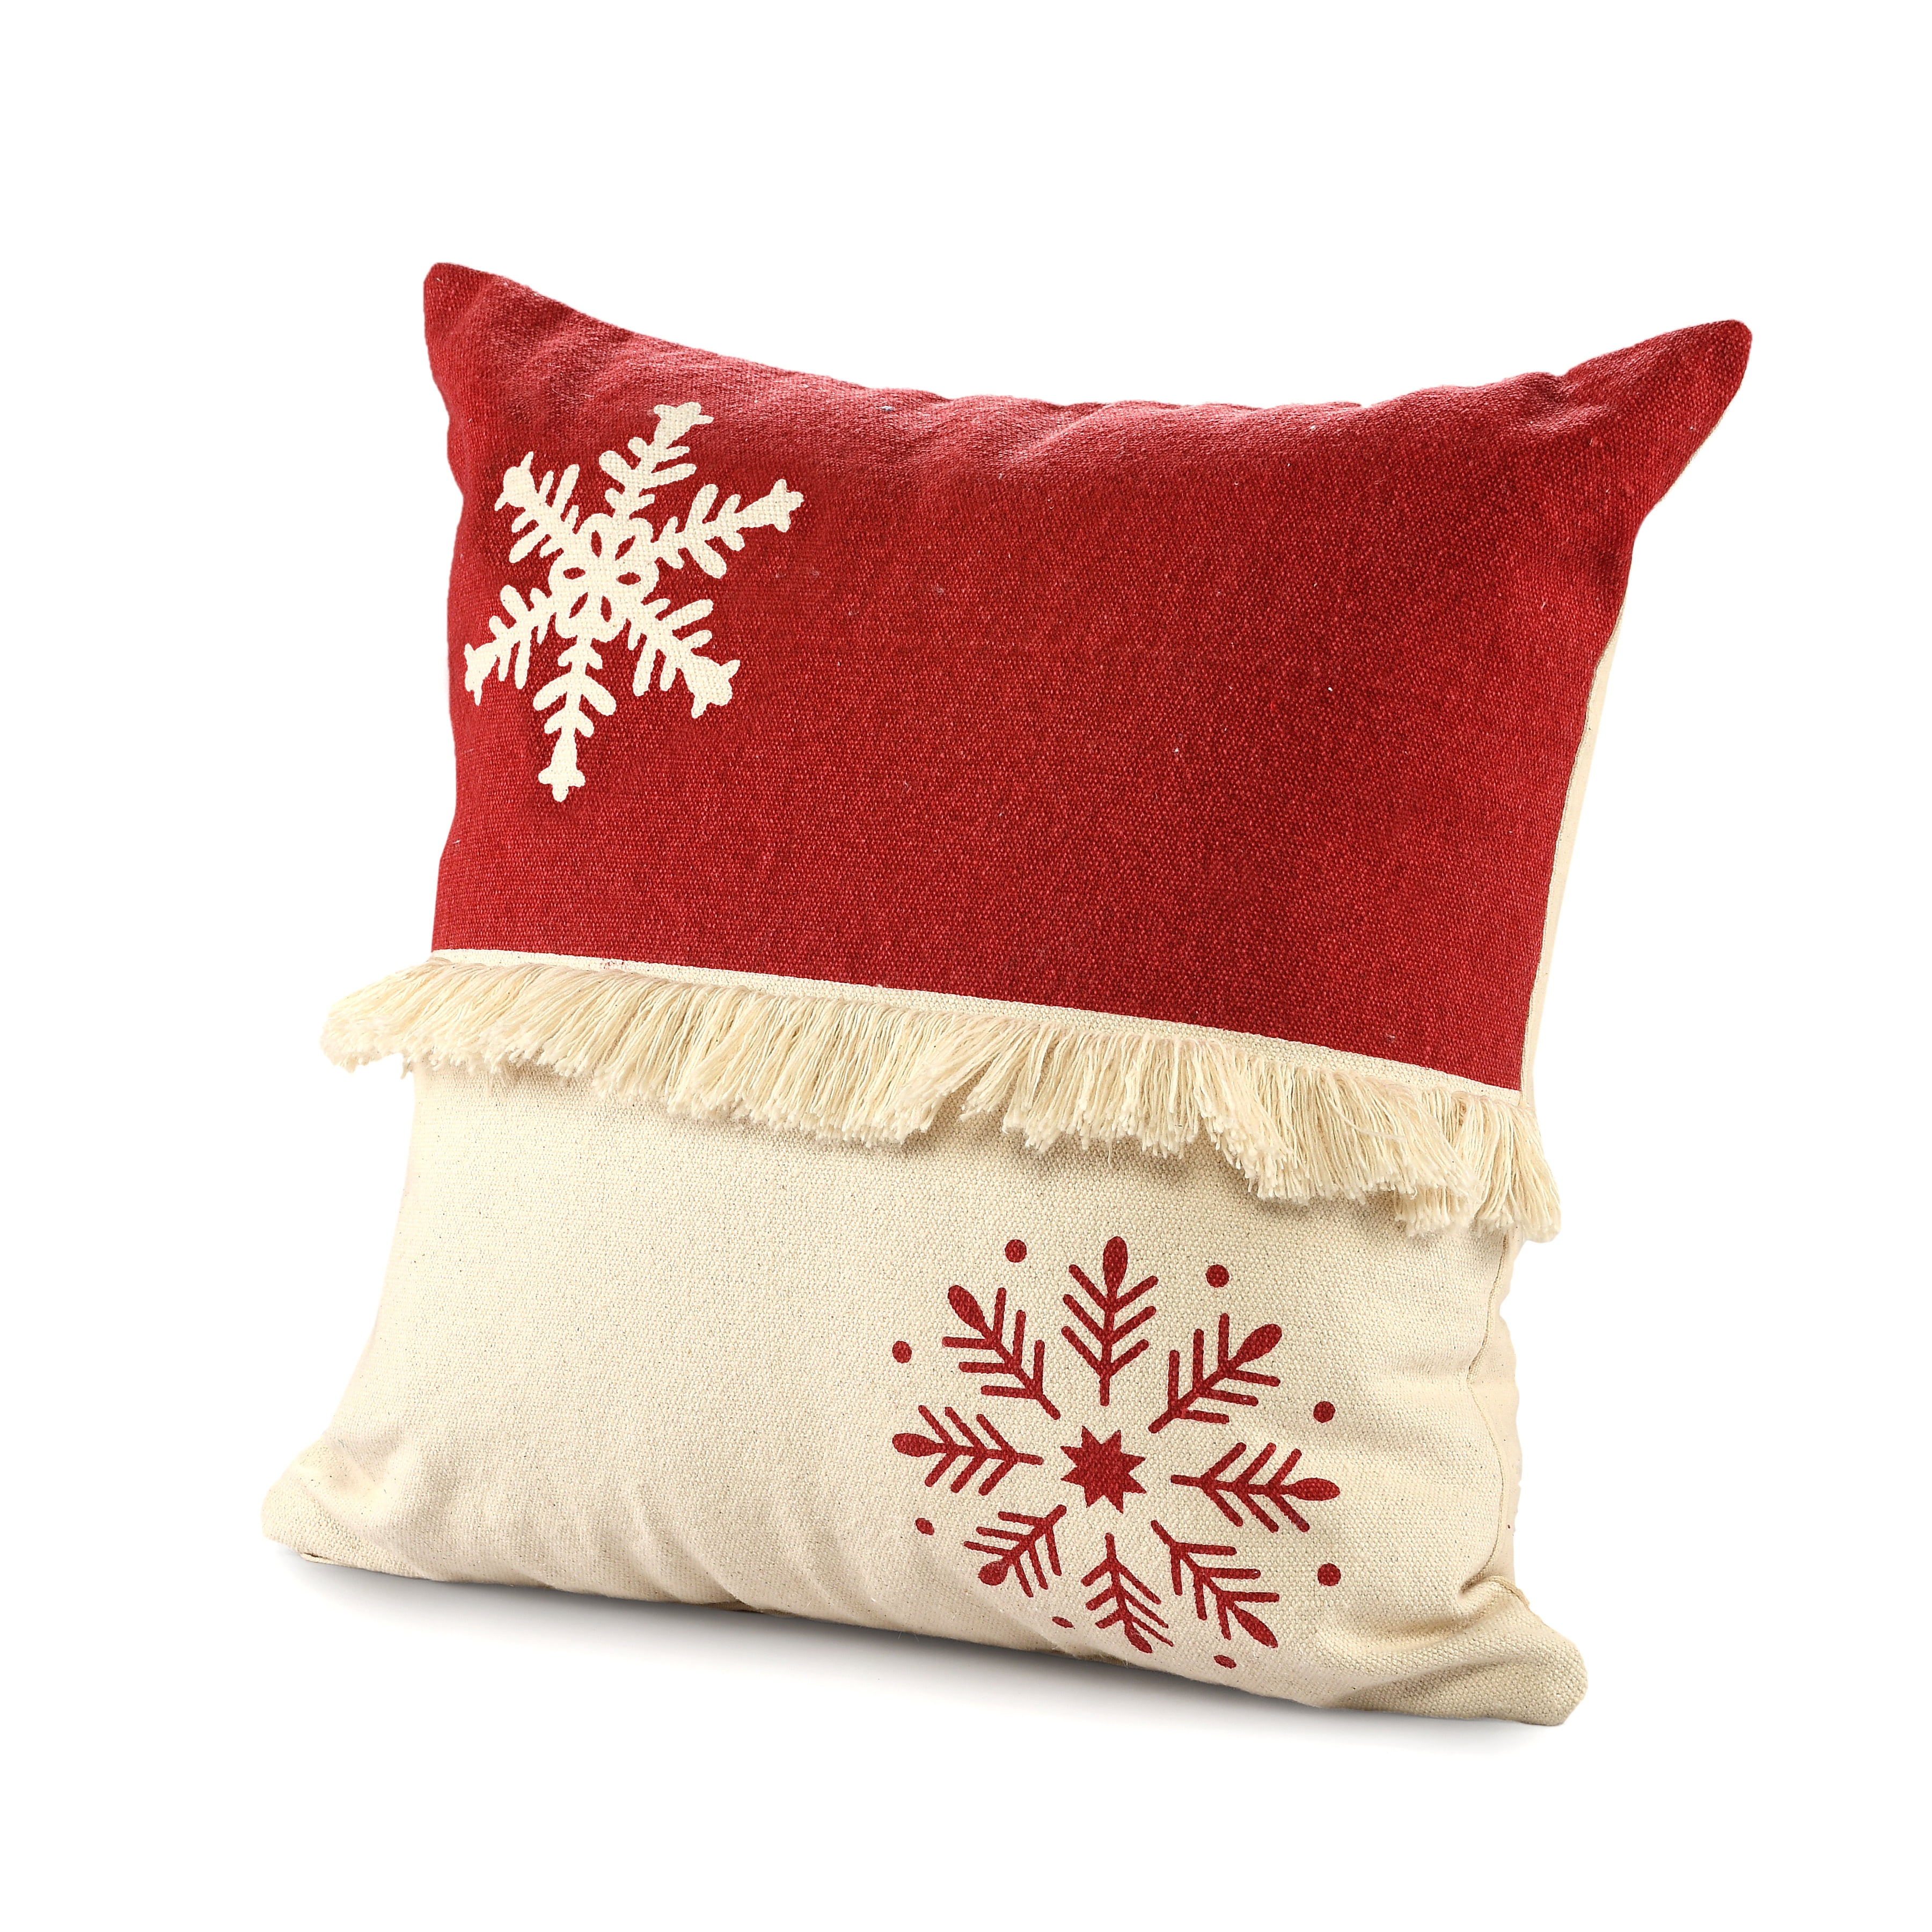 Outdoor Throw Pillow Waterproof Pillows,Winter Snowman Christmas Tree  Snowflake Red Back Decorative Pillow Covers with Insert,Patio Pillows  Pillowcase